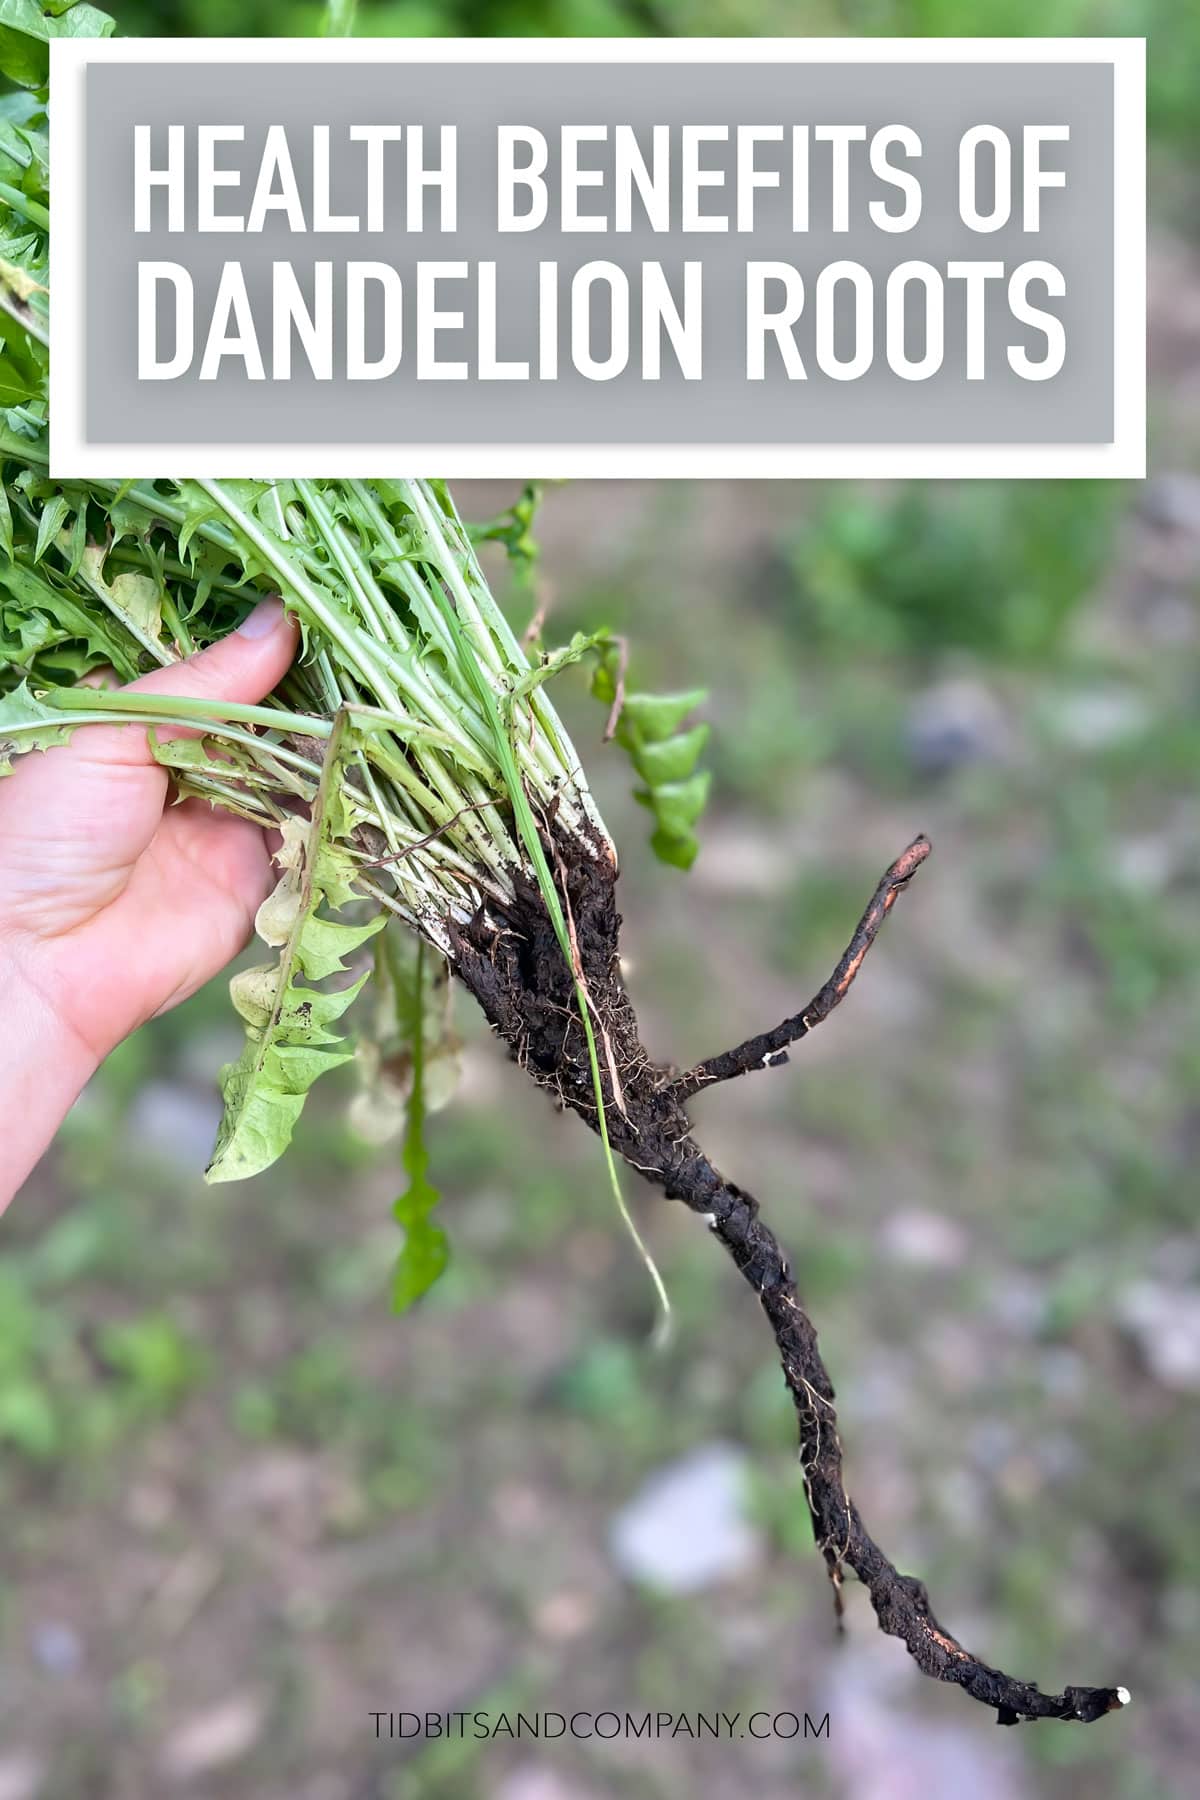 Dandelion plant with roots and text "benefits of dandelion roots"